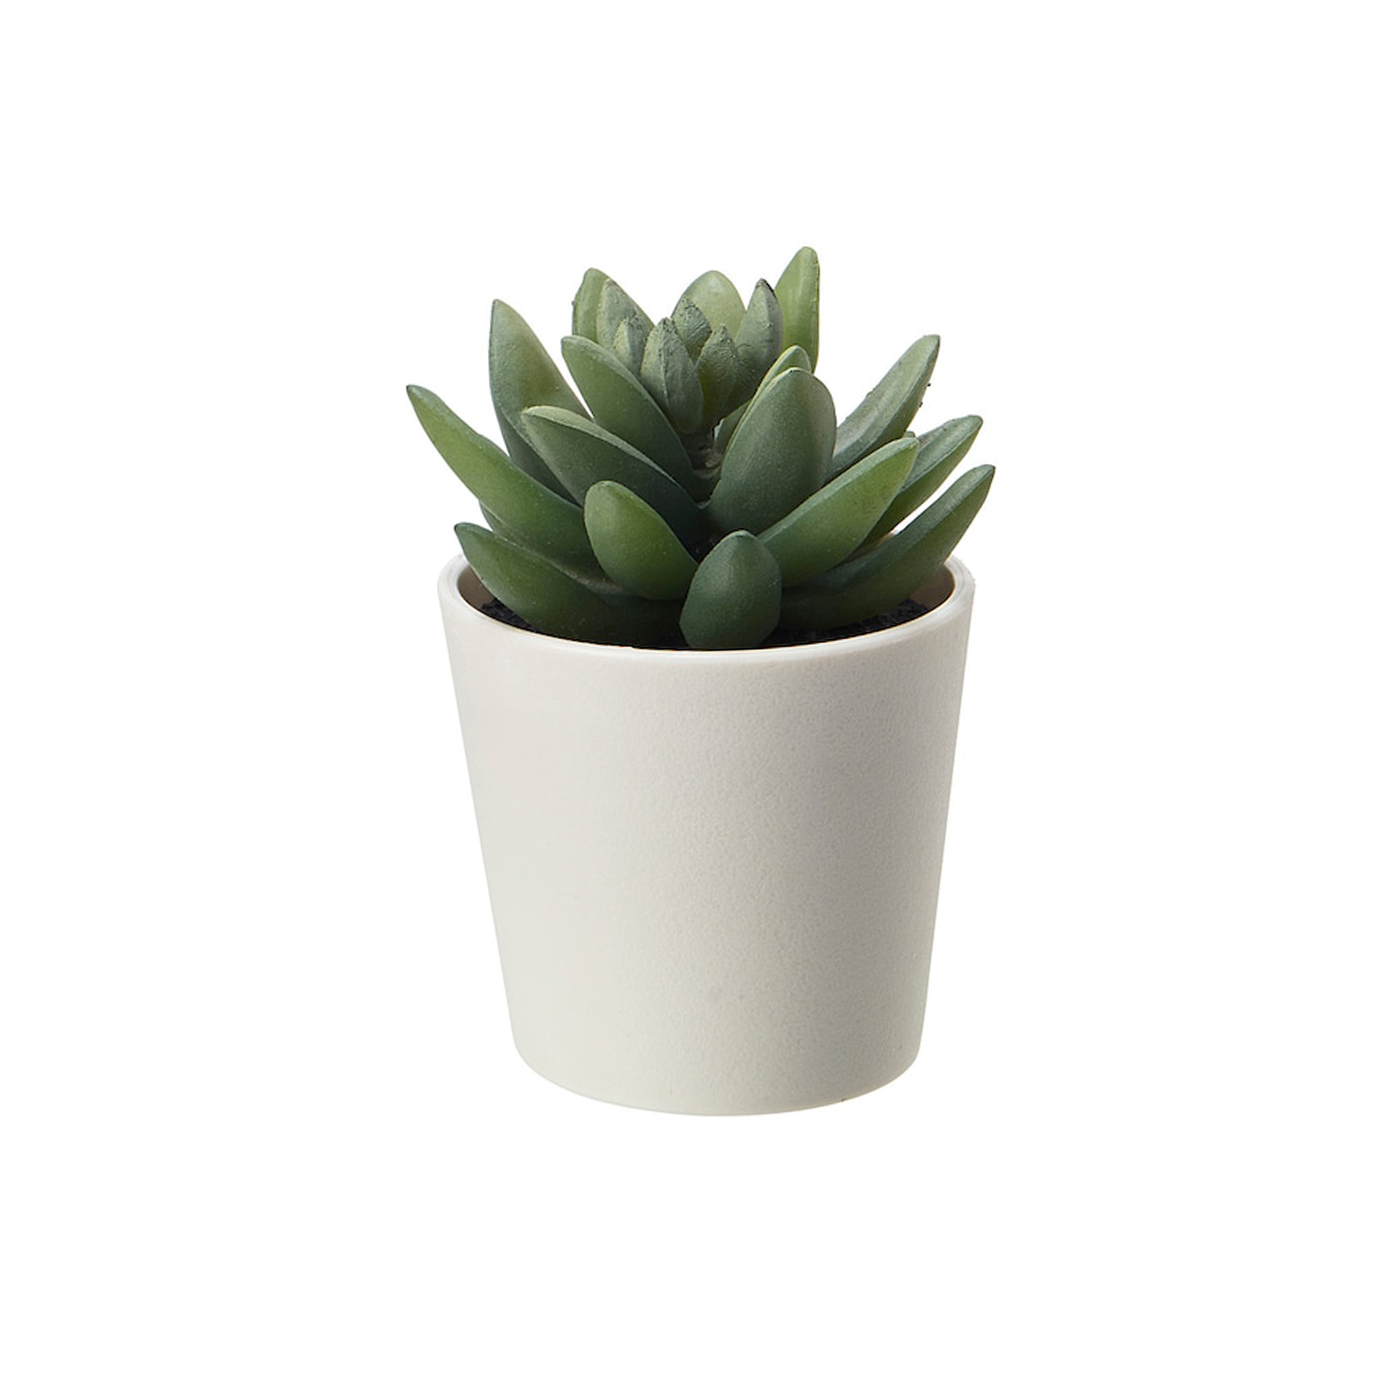 Small Plant with a Cute Pot